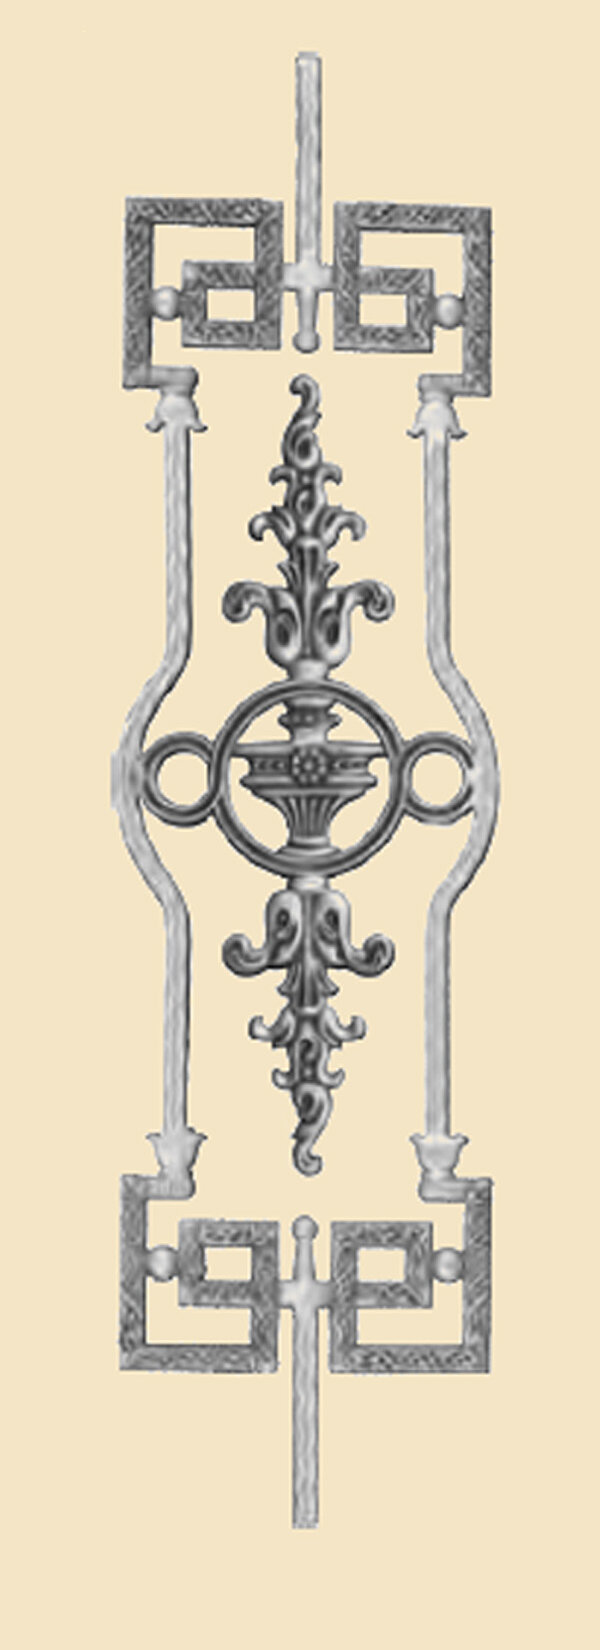 Decoration objects in cast iron for gates and guards - REF : 1282